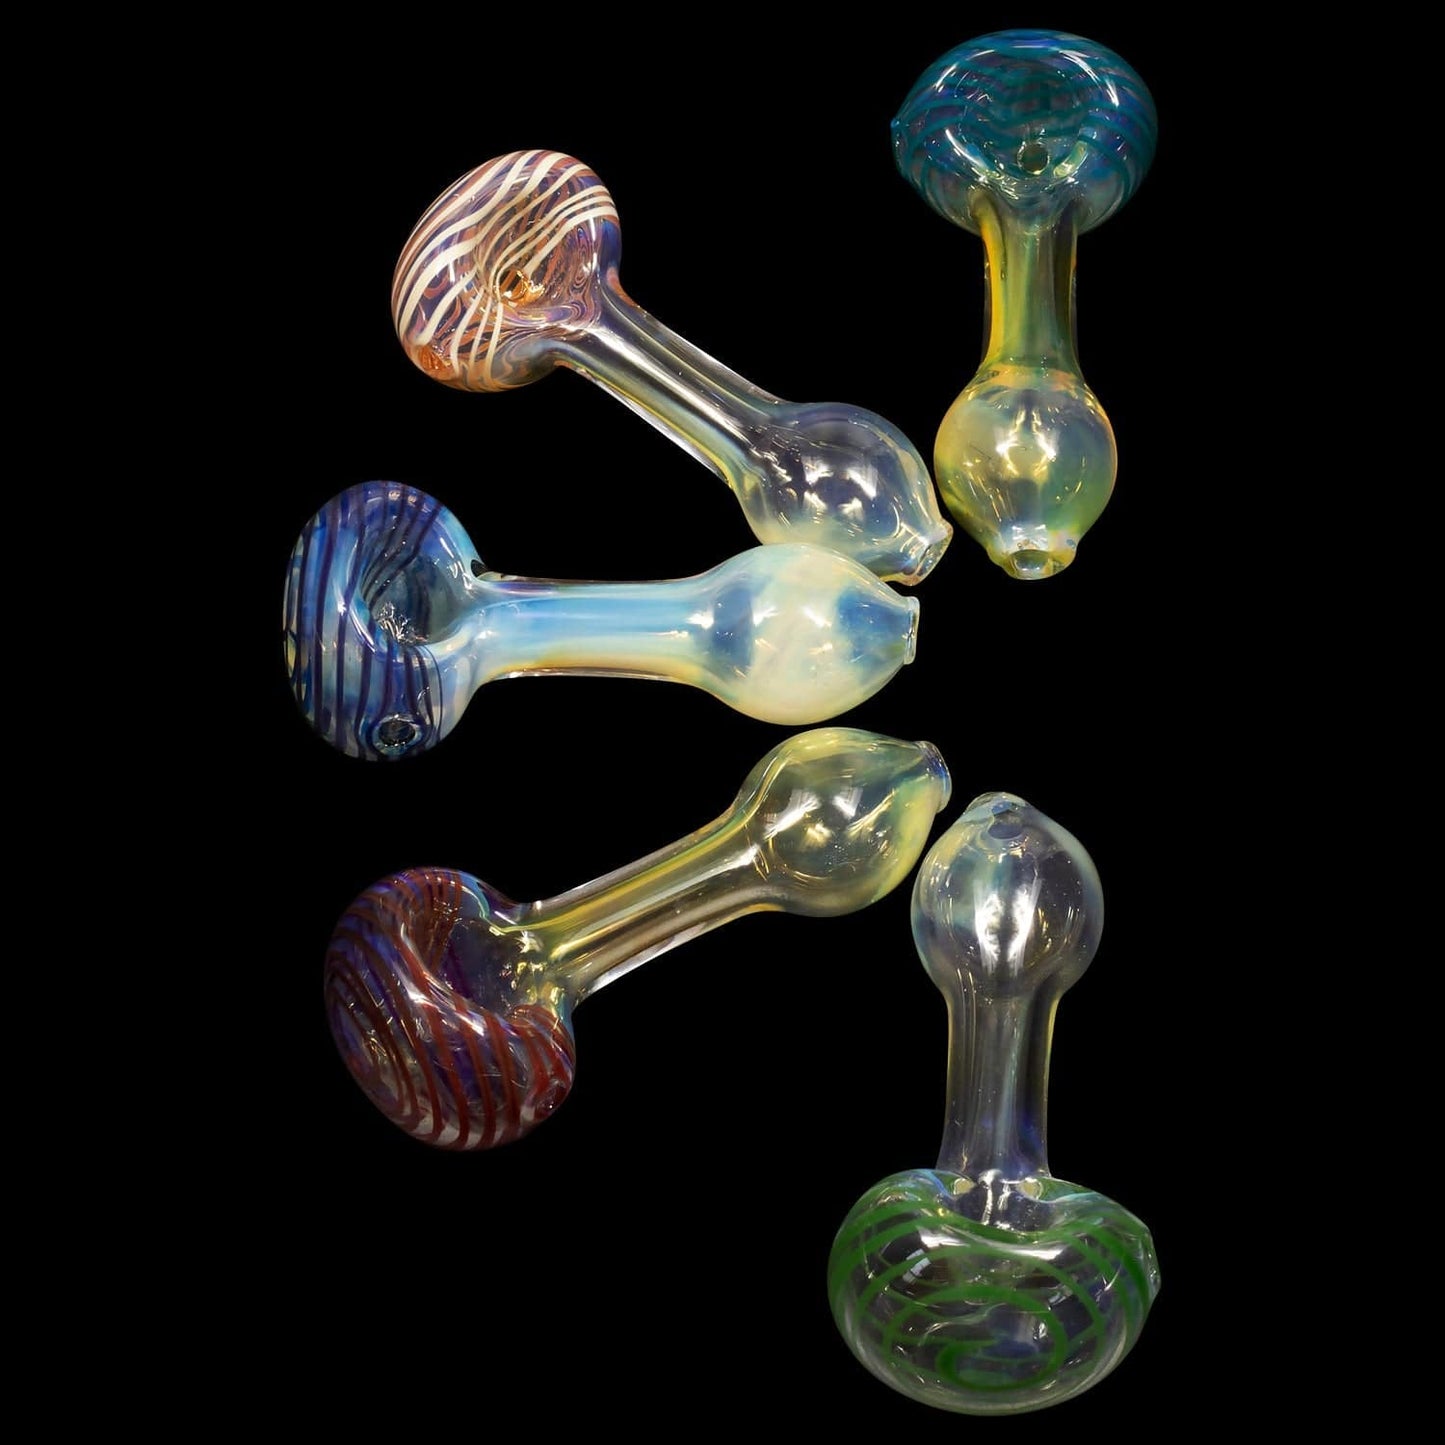 LA Pipes Hand Pipe "Spiral-Head" Color Changing Glass Spoon Pipe